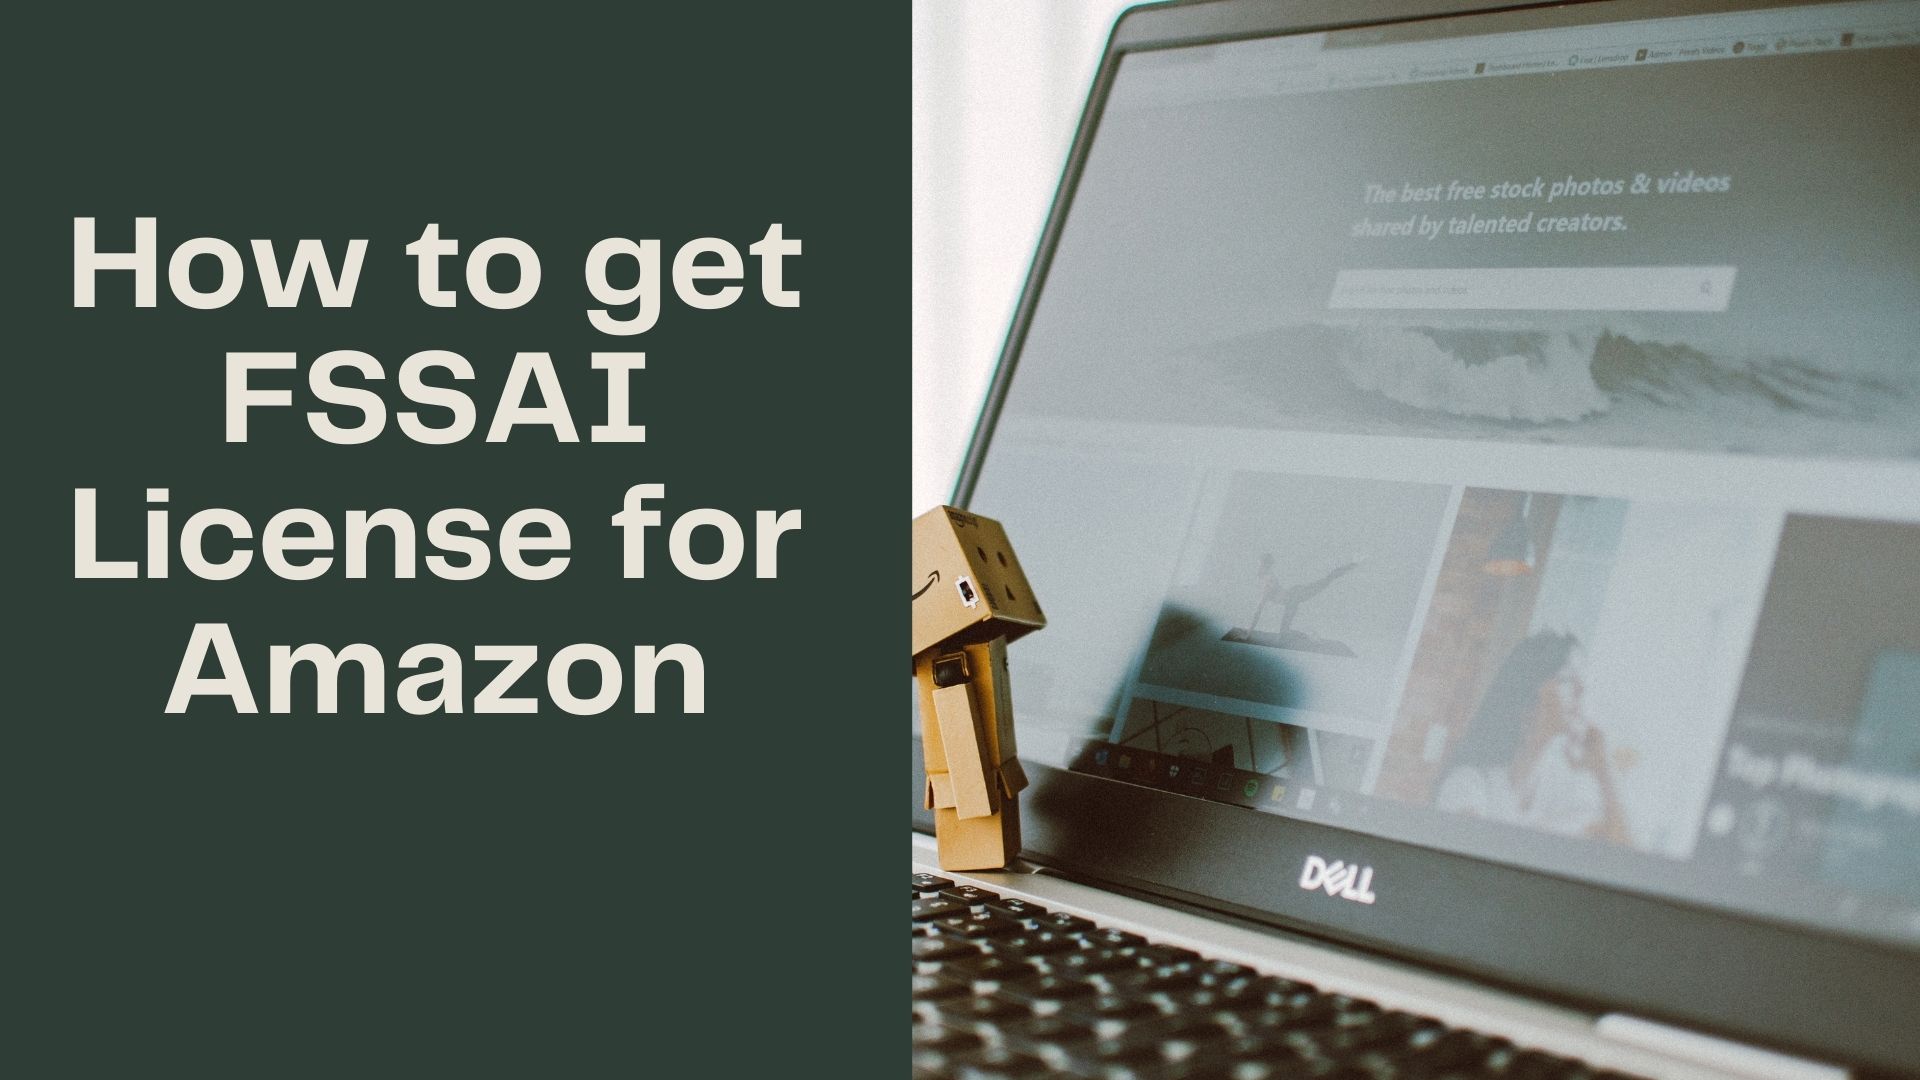 How to get FSSAI License for Amazon